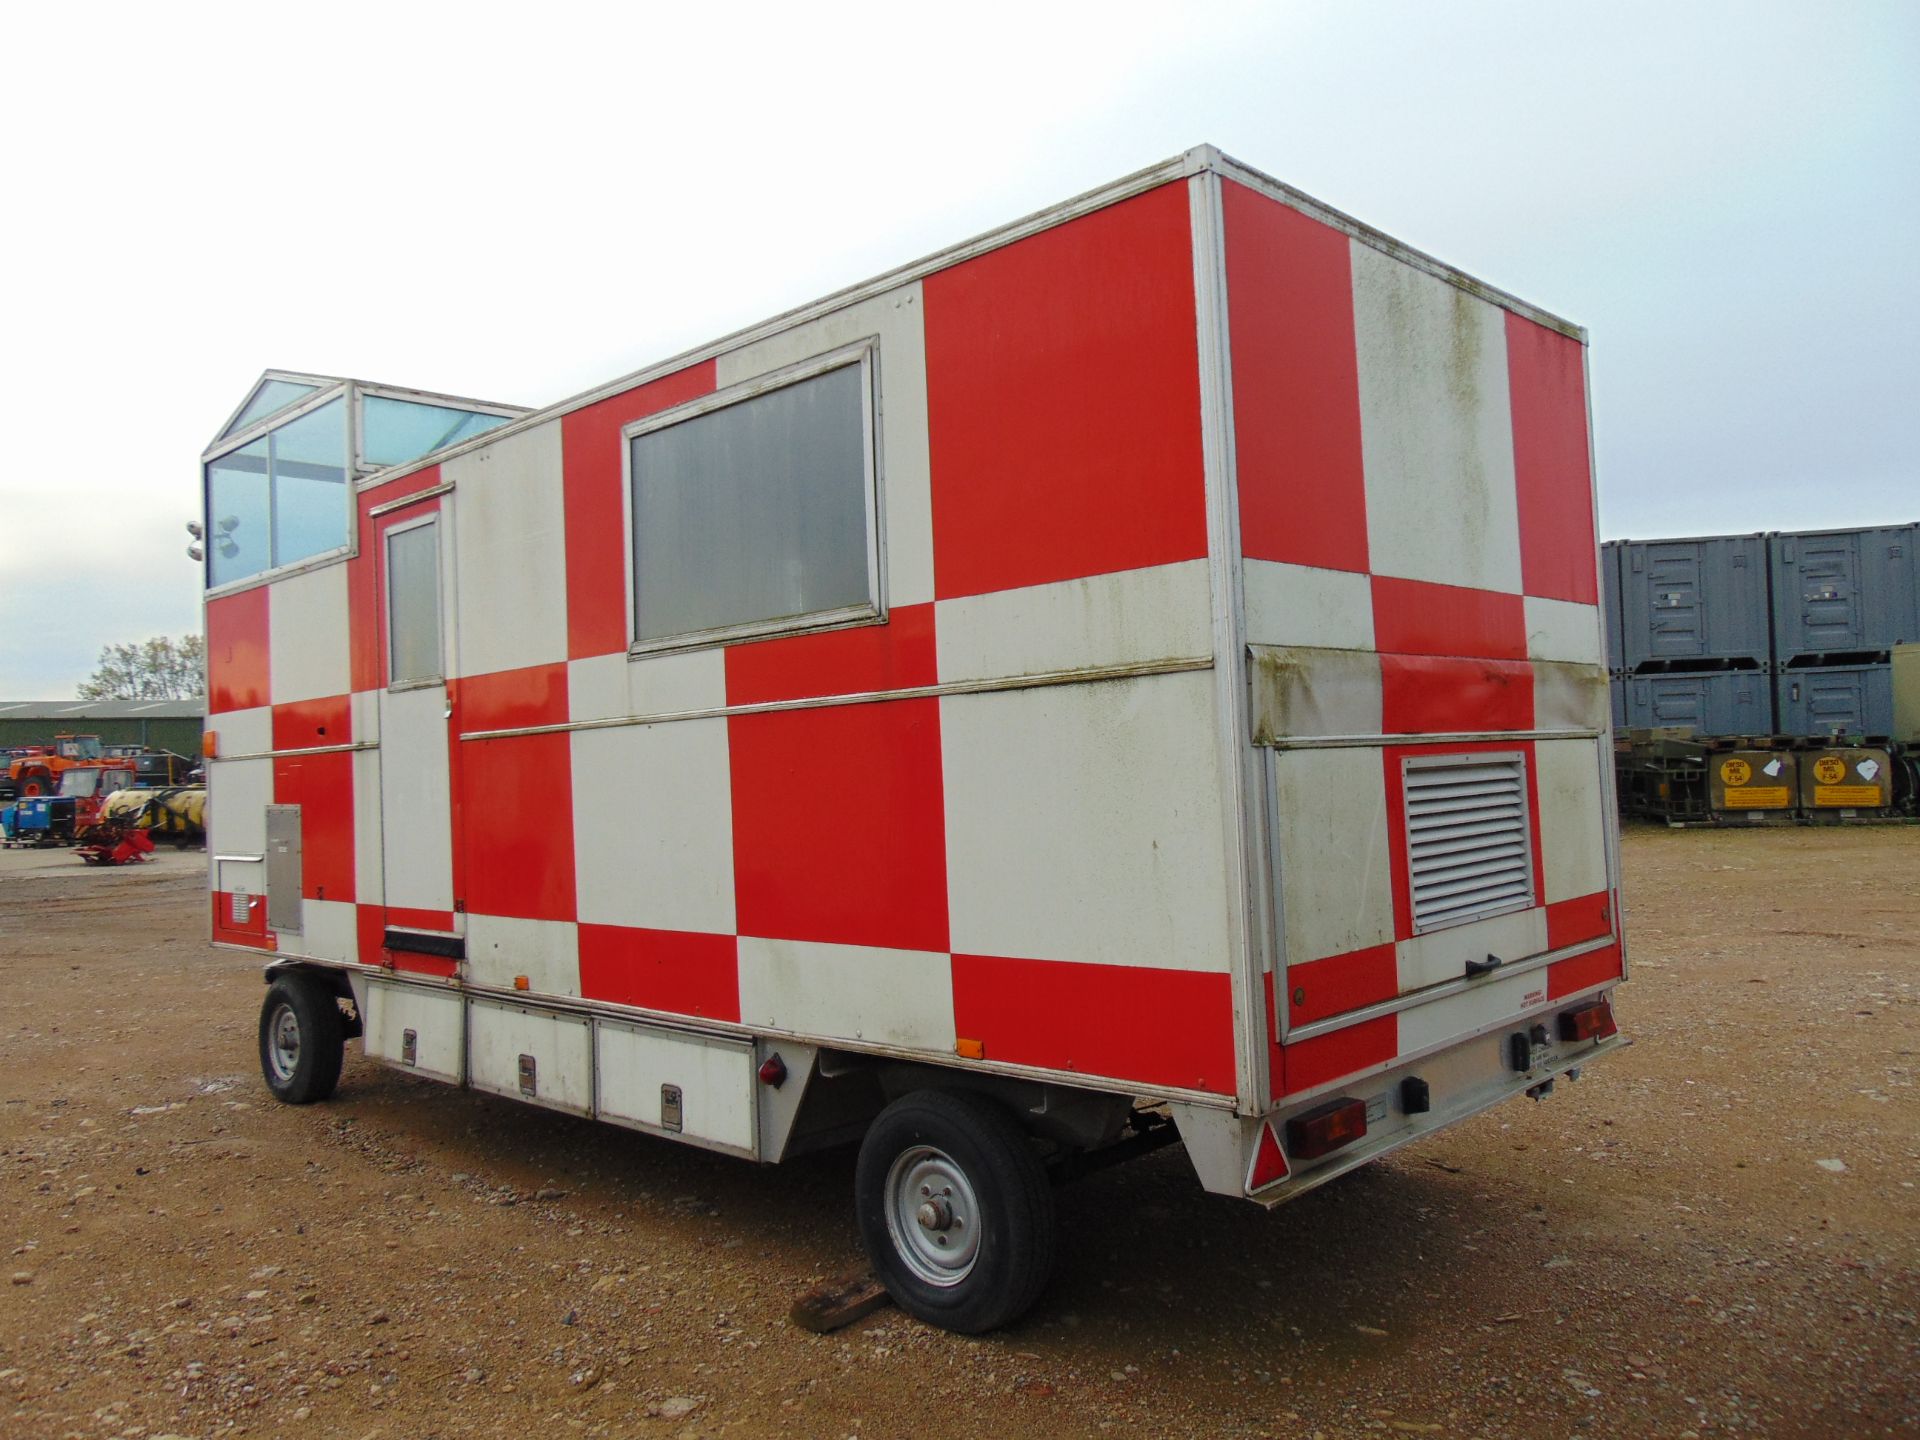 Ex Royal Air Force Mobile Observation and Command Centre - Image 7 of 21